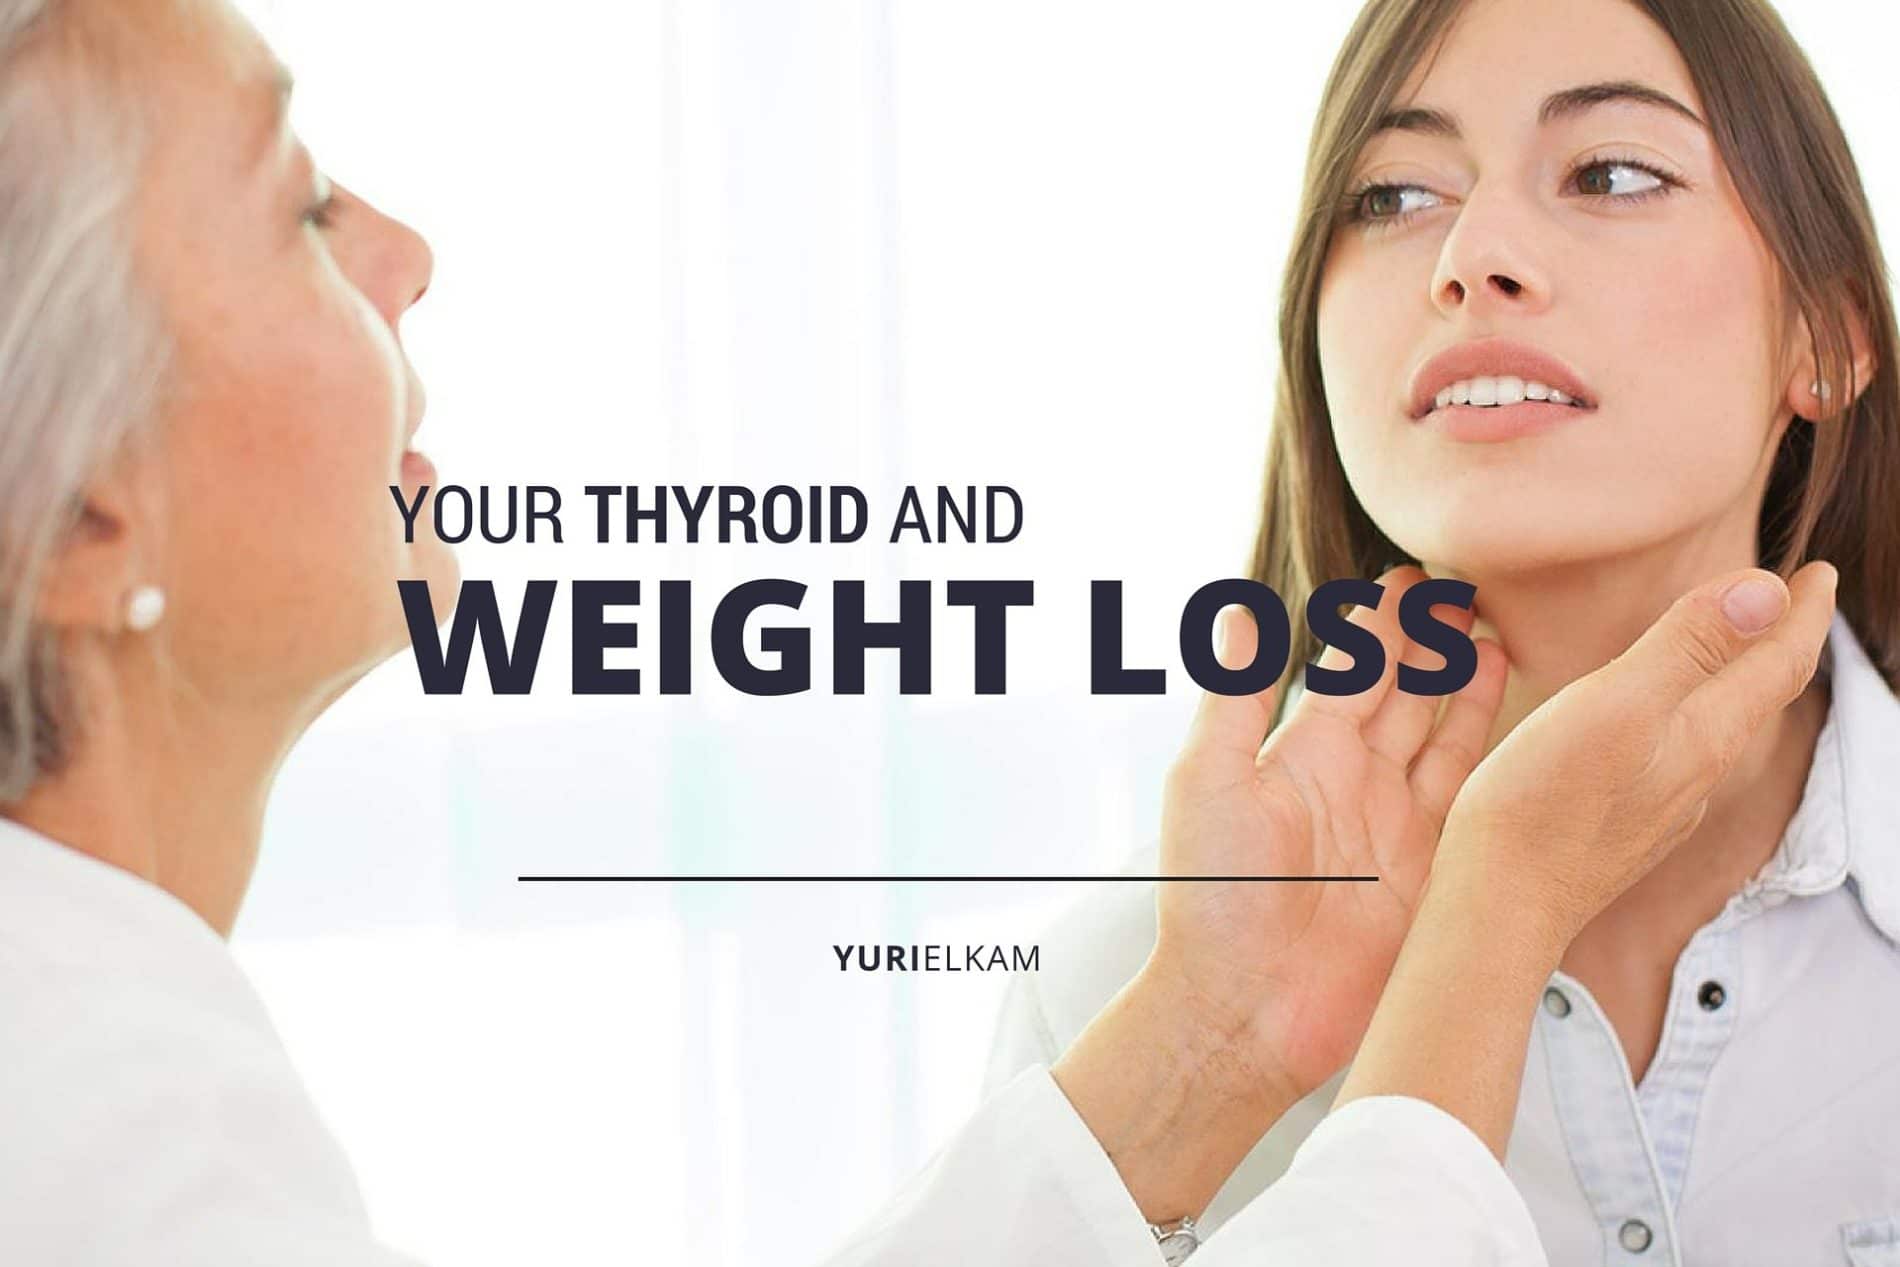 Article - Not Losing Weight? Low Thyroid Might Be Why